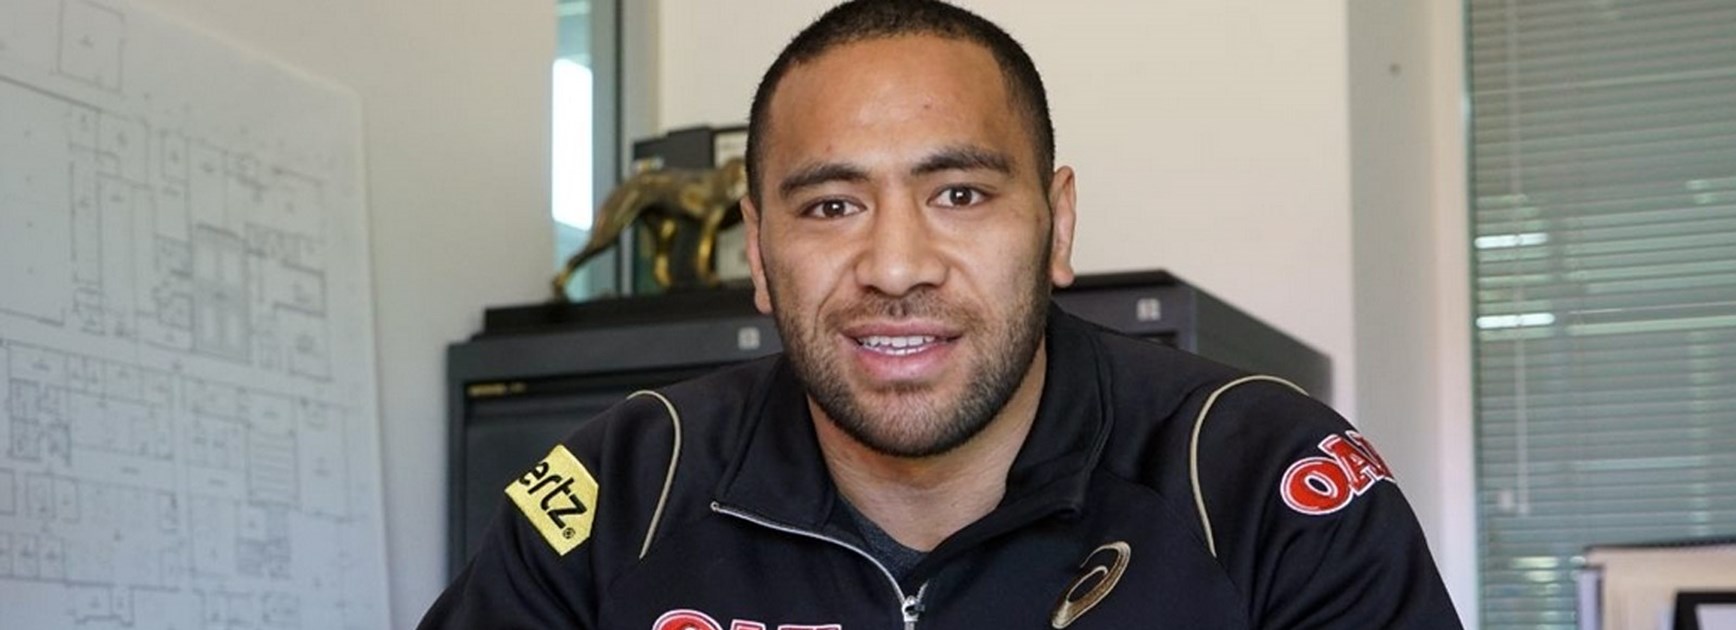 Penrith have secured the services of former Roosters and Warriors forward Suaia Matagi.